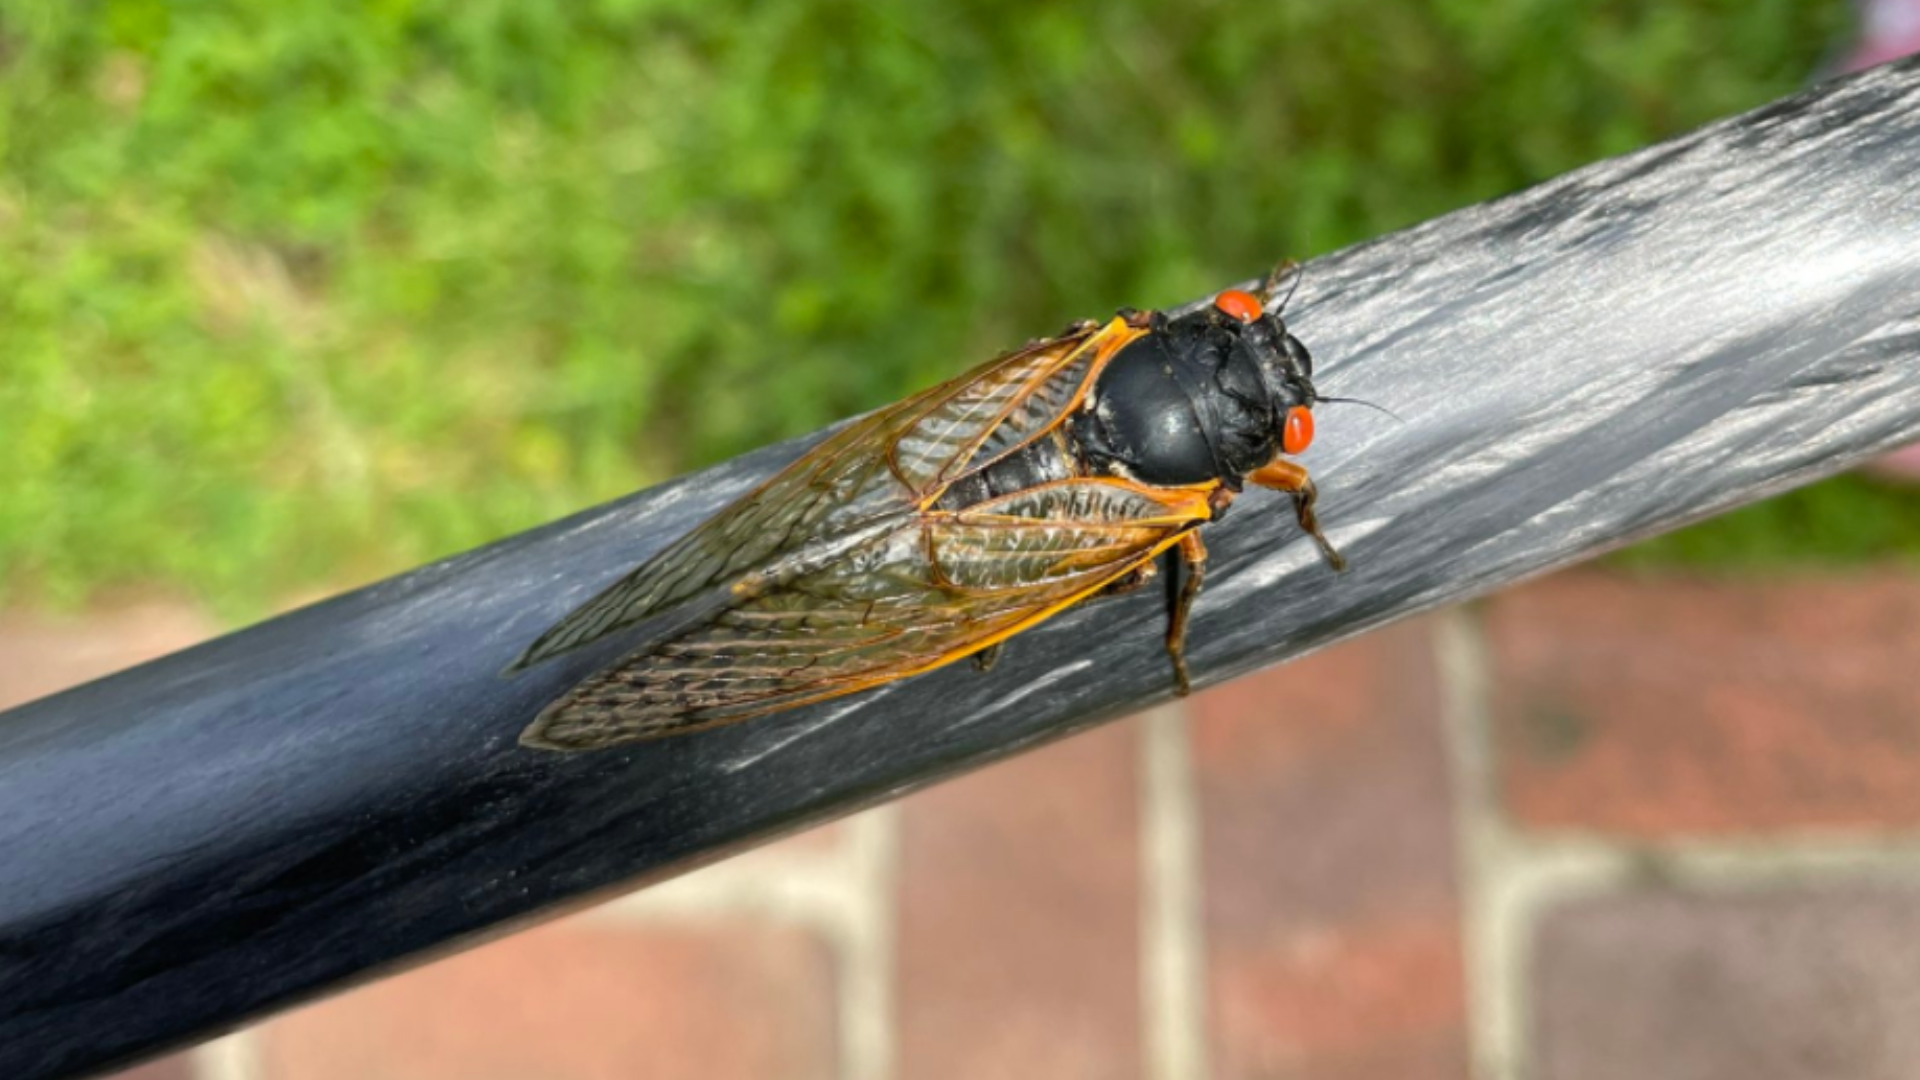 The Verify team spoke with the experts about when Cicadas will leave our skies.